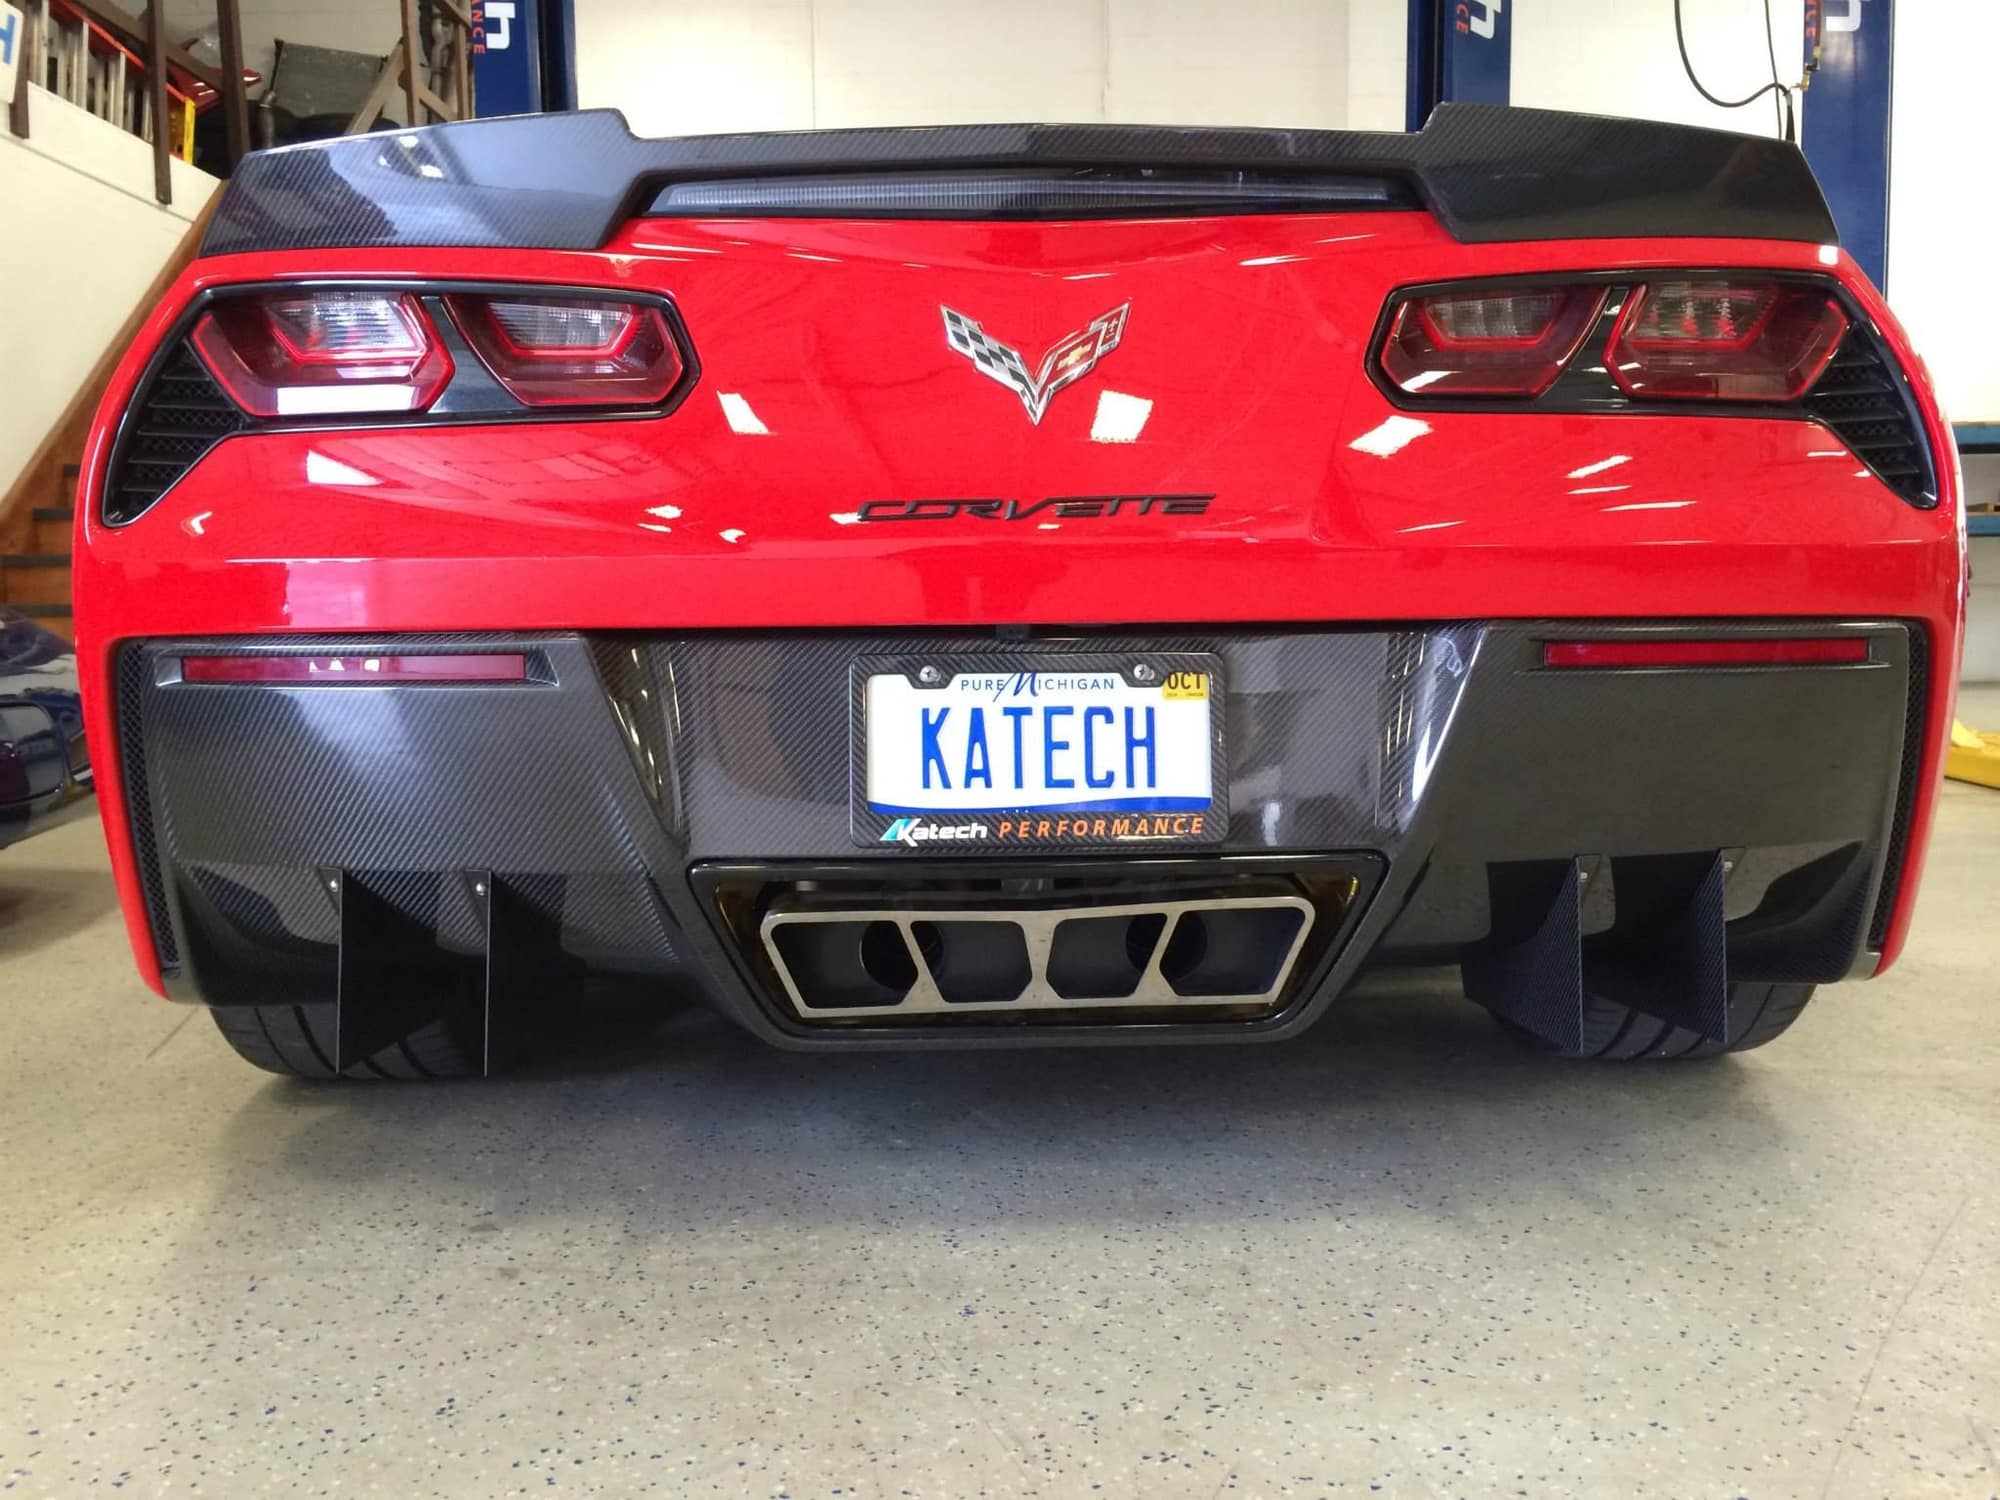 Katech C7 Carbon Fiber Rear Diffuser With Optional Strakes.